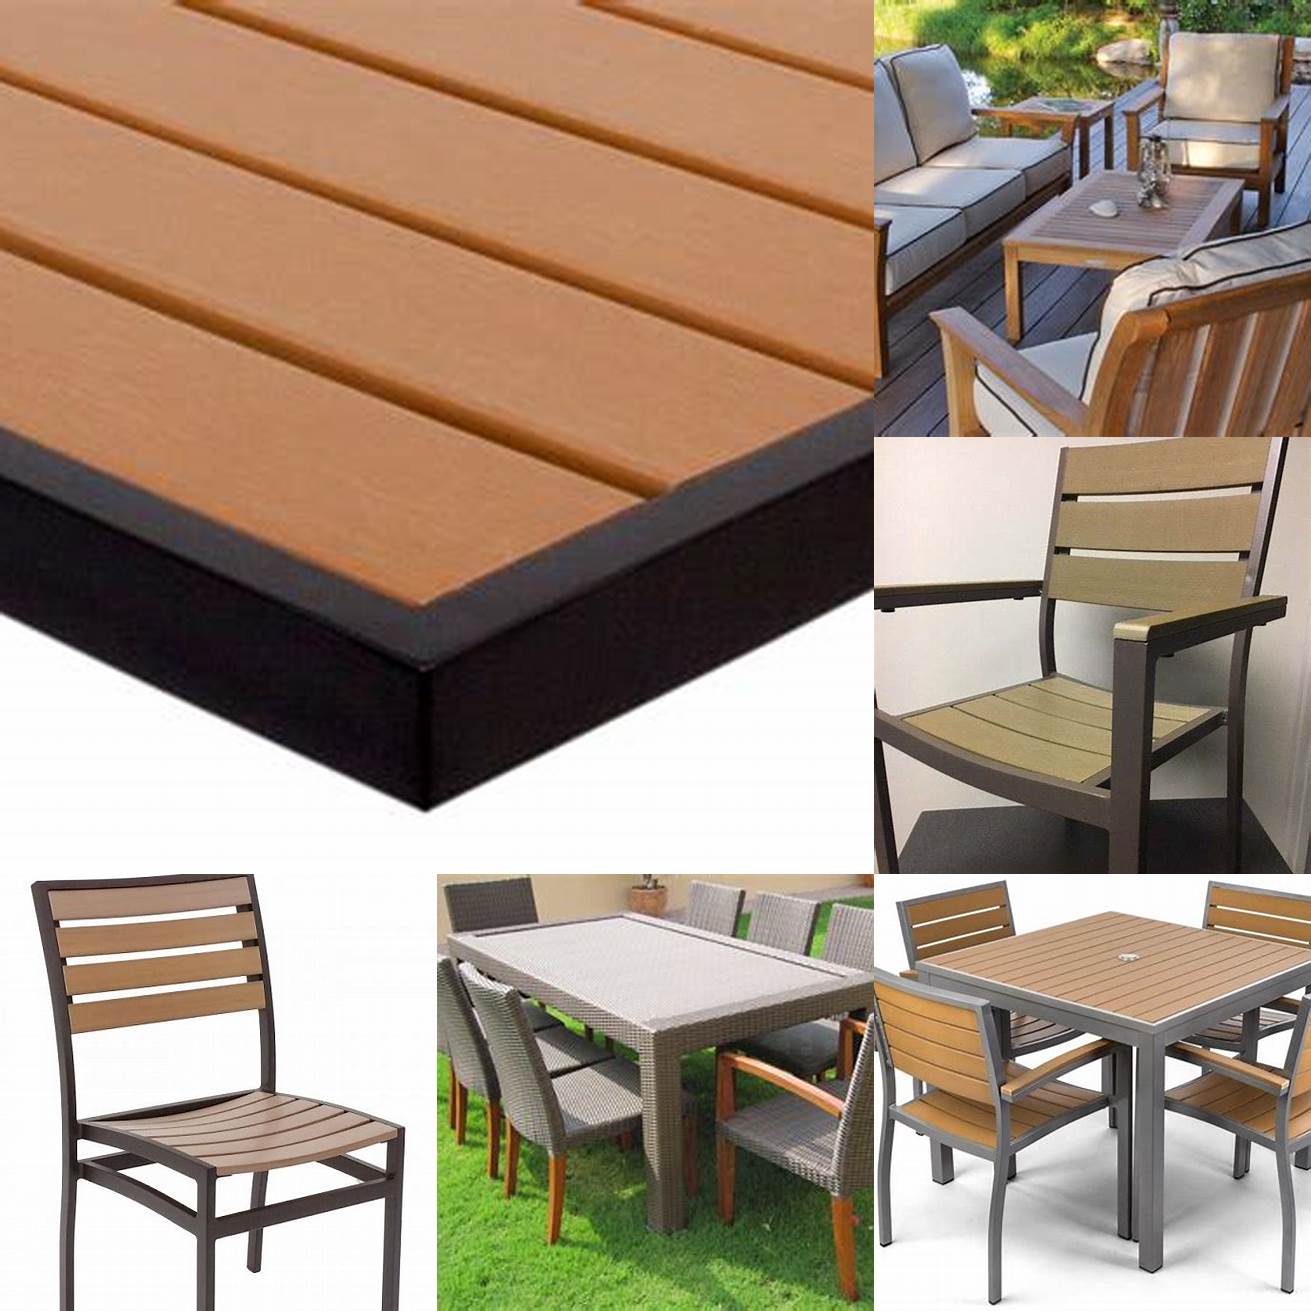 Synthetic teak accessories